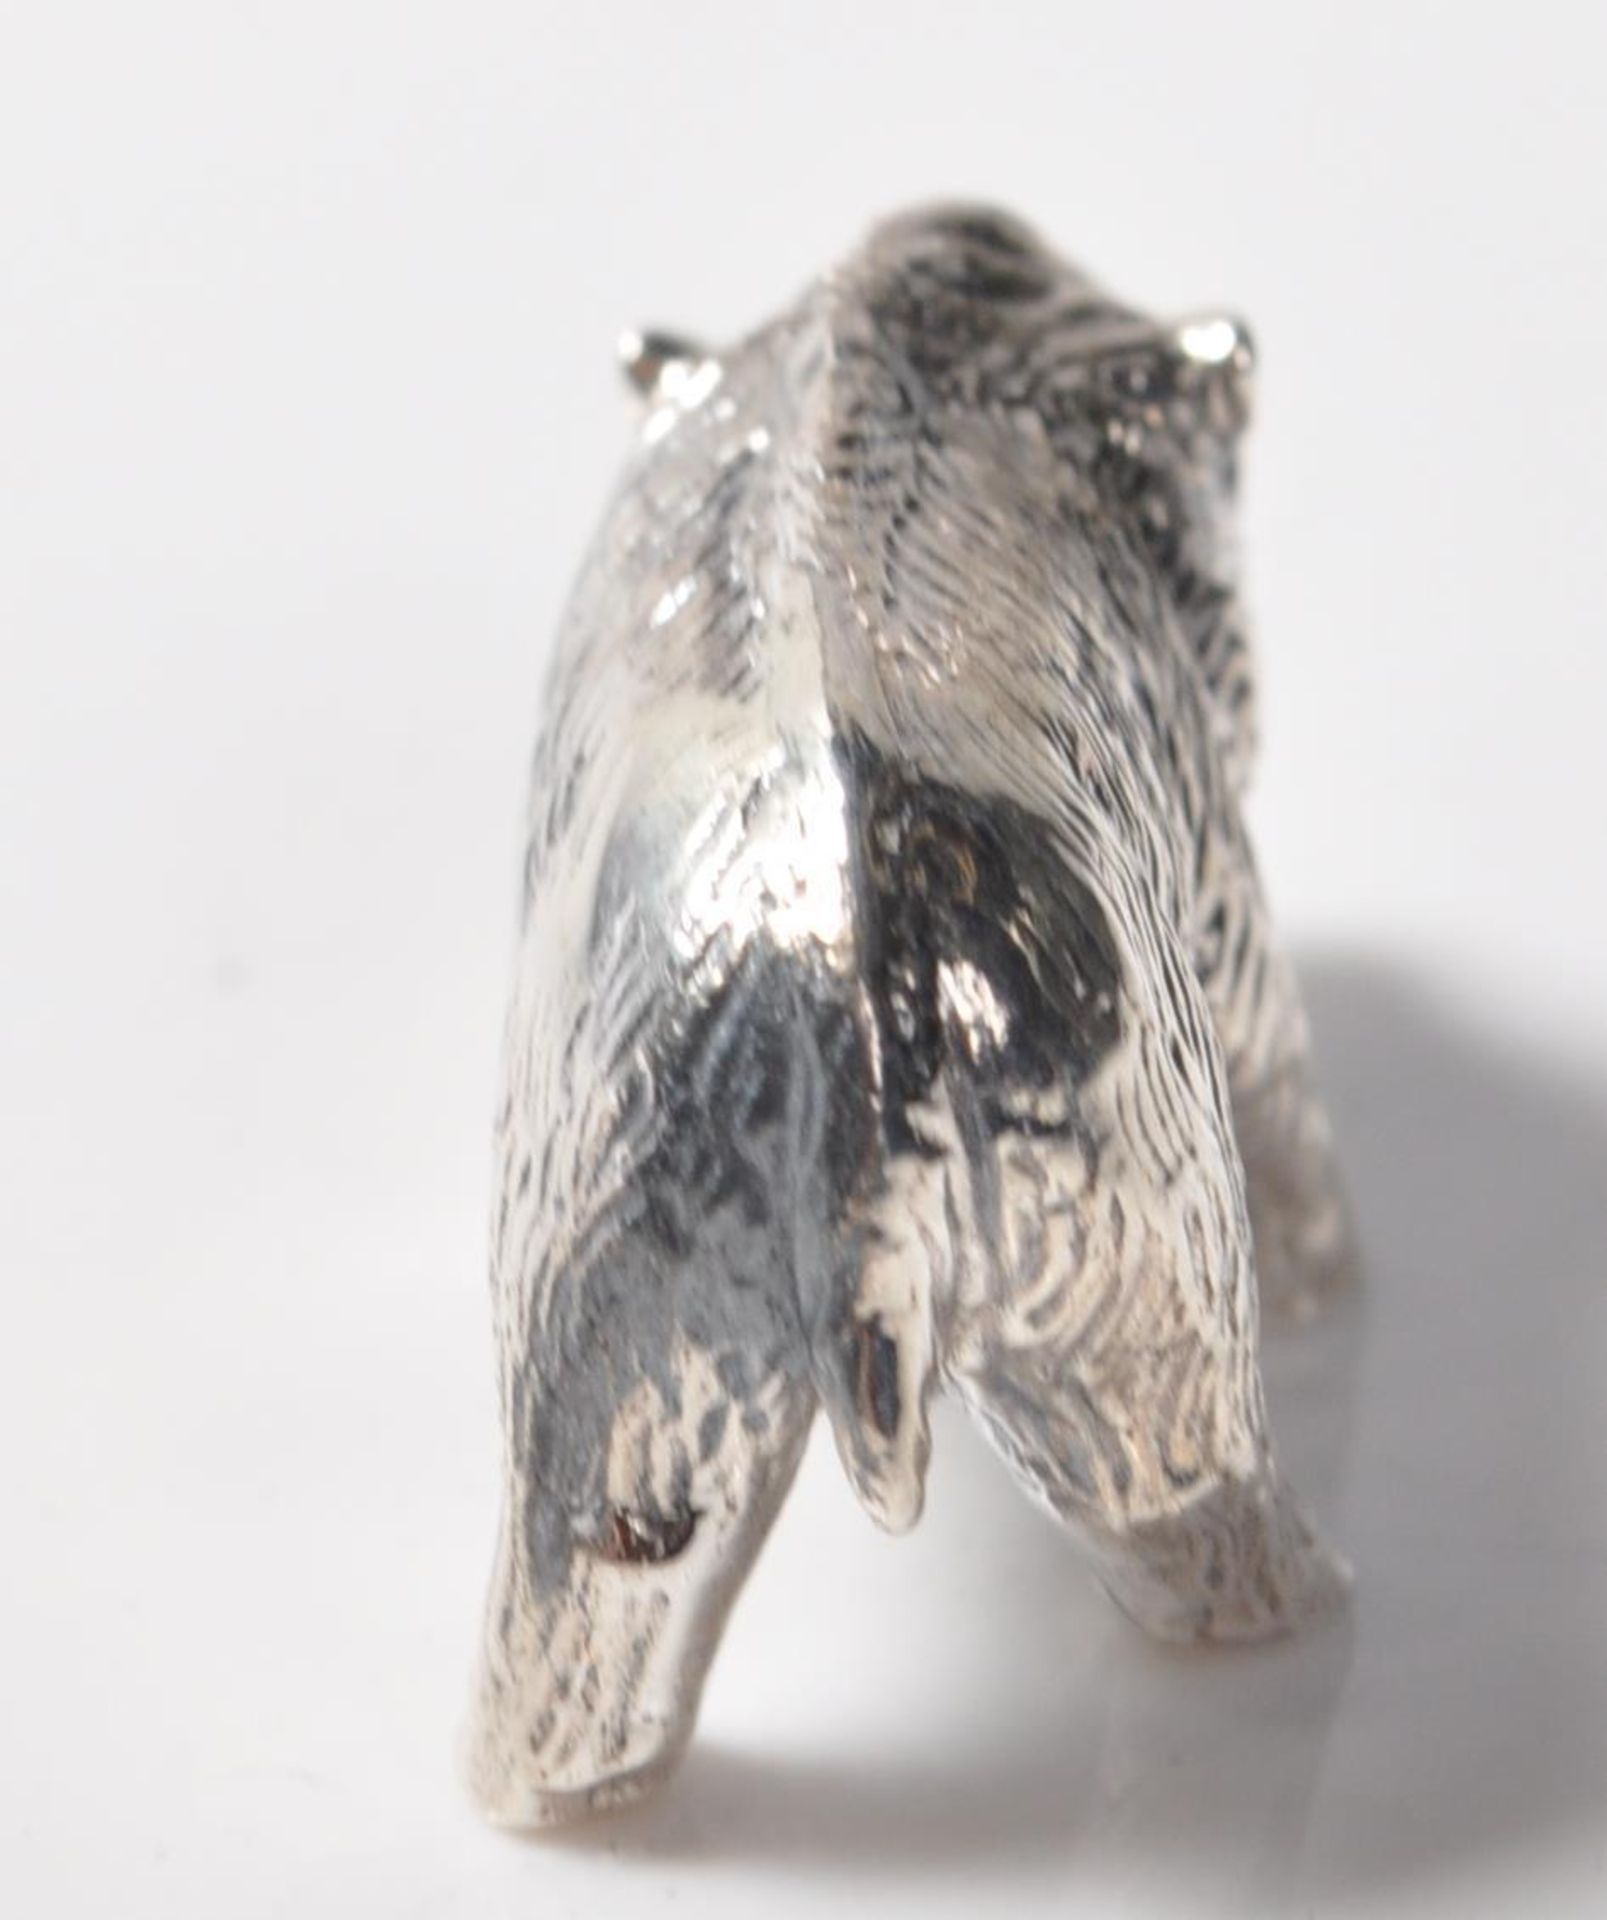 STAMPED STERLING SILVER MINIATURE TRUFFLE PIG - Image 4 of 5